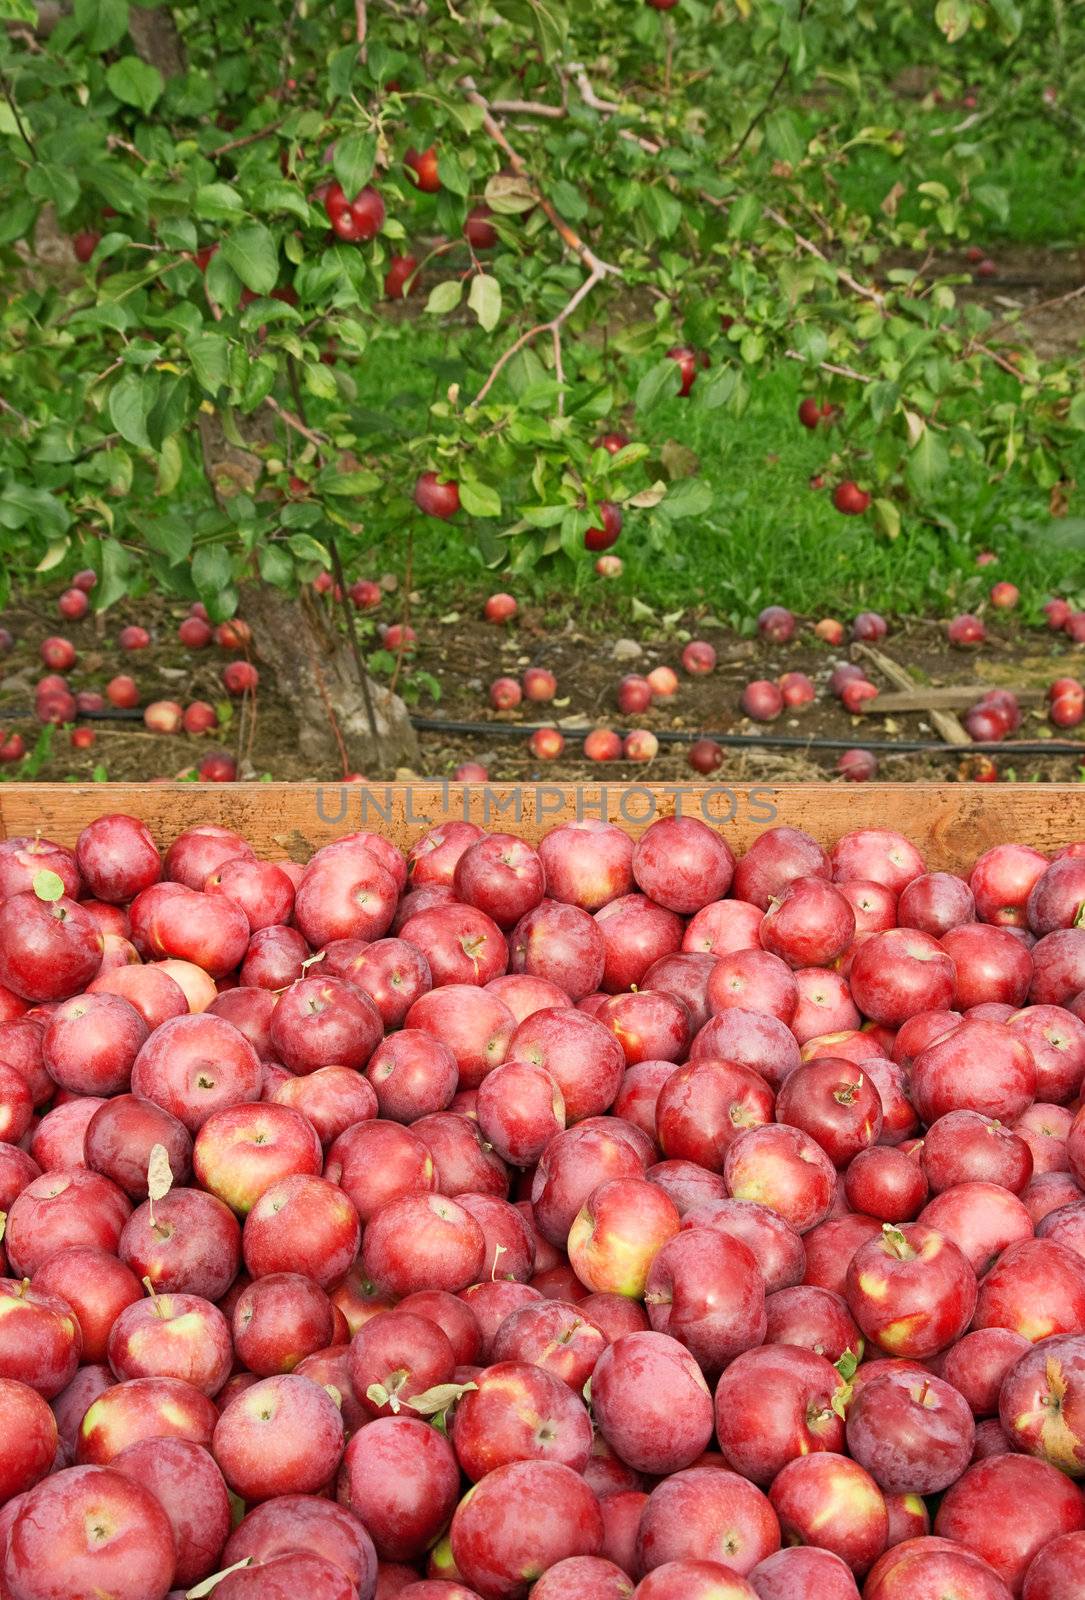 Freshly picked red apples in a wooden box, with apple tree in the background.